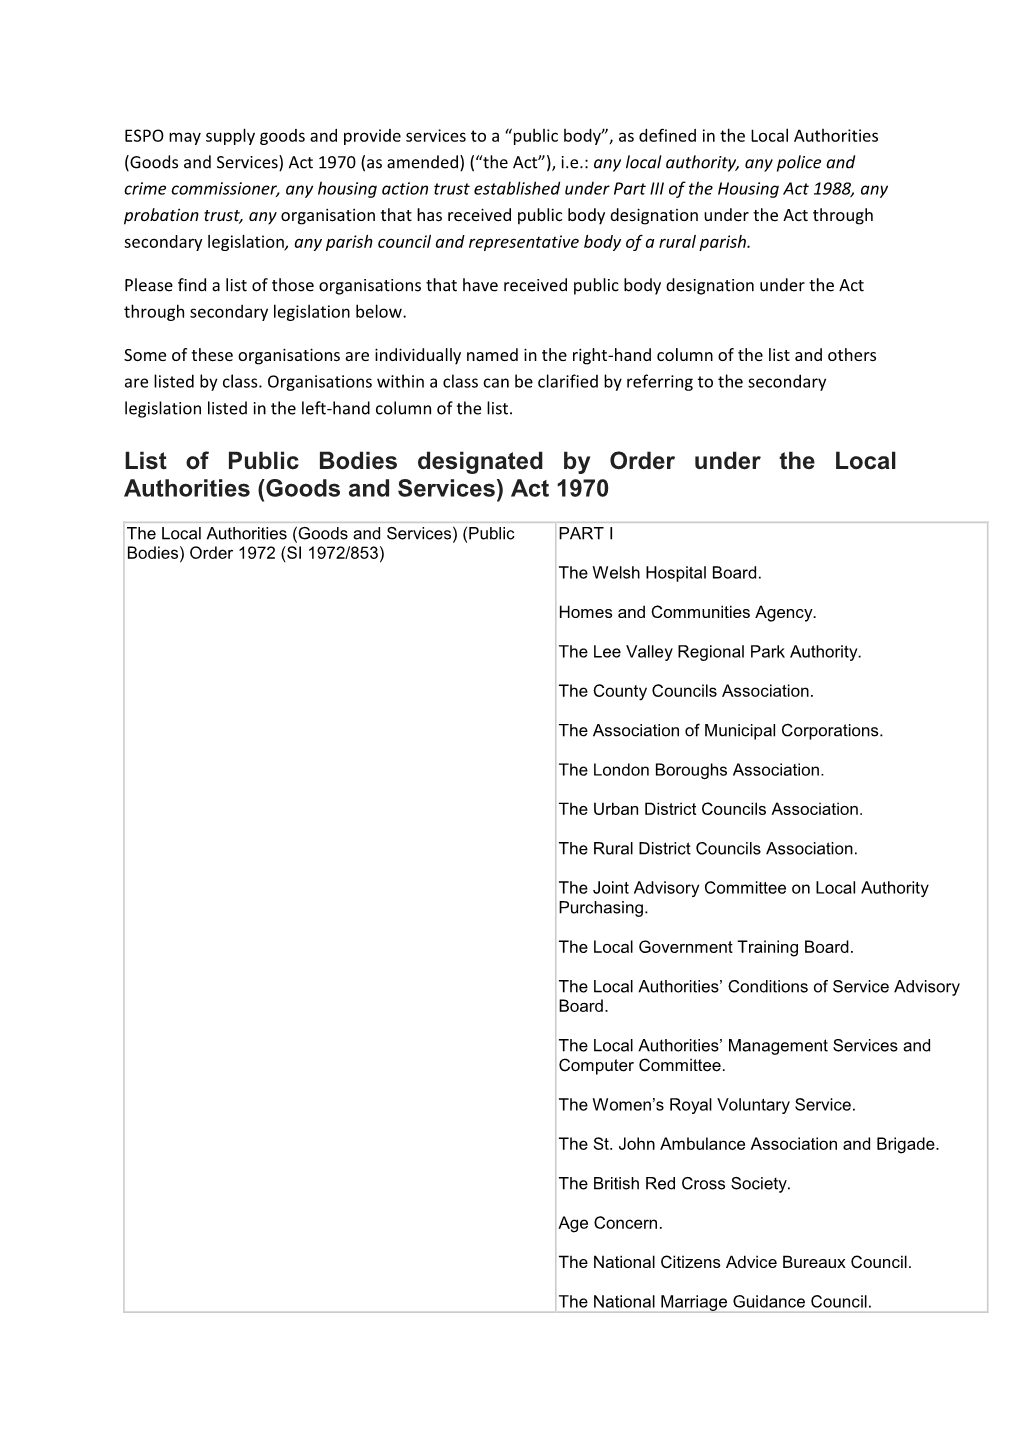 List of Public Bodies Designated by Order Under the Local Authorities (Goods and Services) Act 1970